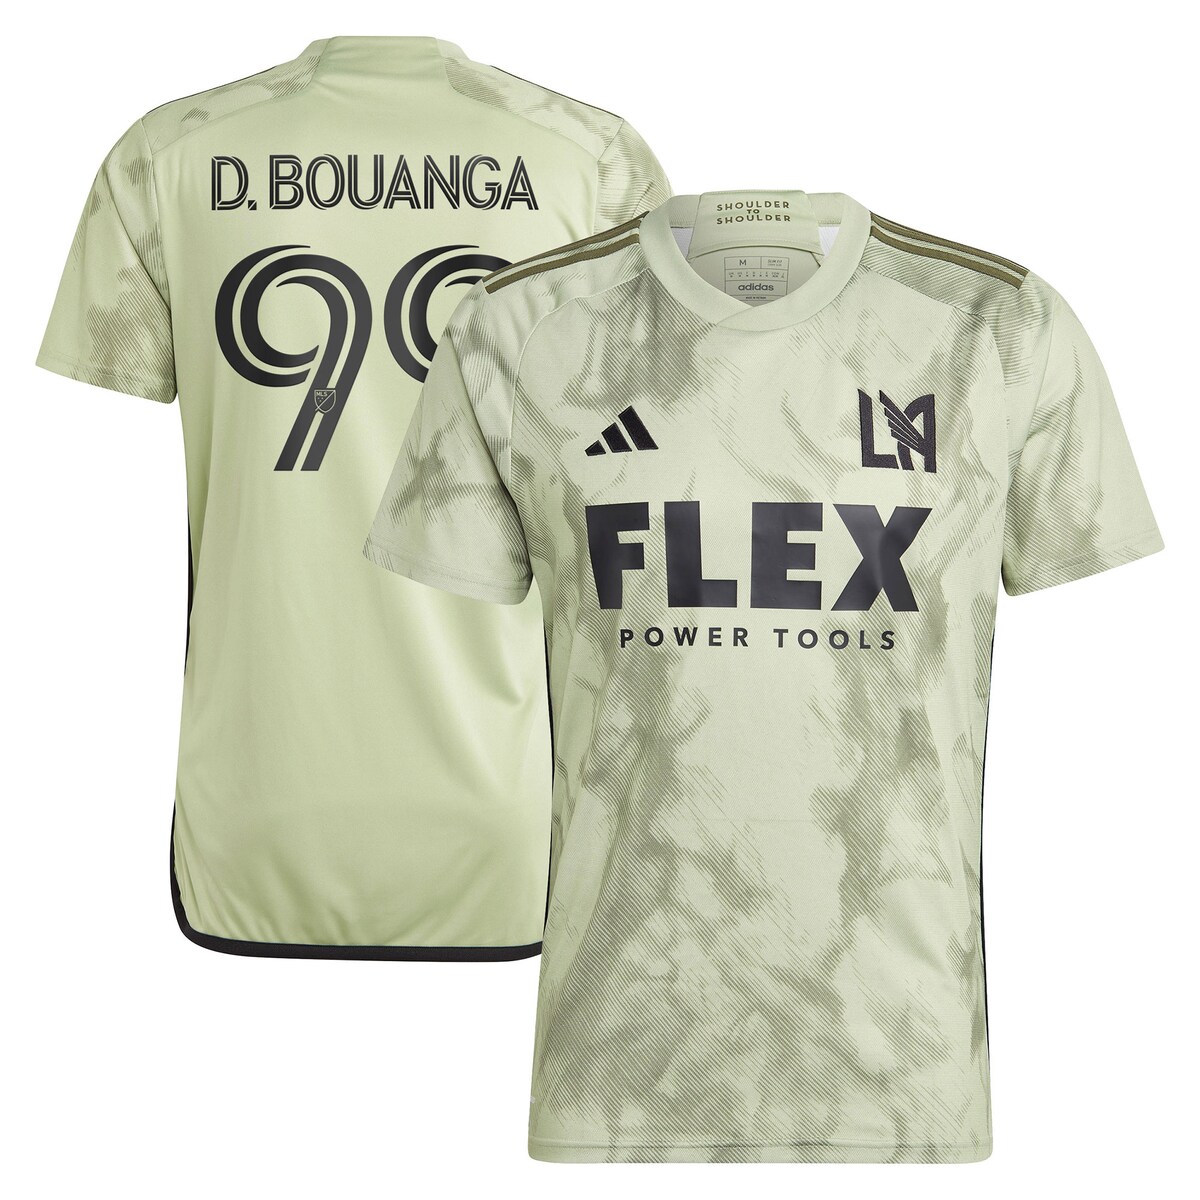 Commemorate the recent success of your favorite MLS team by adding this Denis Bouanga 2023 Smokescreen Replica Player Jersey to your LAFC collection. The smoke across the chest panel is indicative of the way goals are celebrated and the culture that has been built around the LAFC fanbase. This adidas gear features AEROREADY technology and ventilated, mesh panels that work together to keep you dry and comfortable all game long. Its exciting graphics will motivate you to root for LAFC to have even more success moving forward.Replica JerseyAEROREADY technology absorbs moisture and makes you feel dryEmbroidered adidas logo on right chestMaterial: 100% PolyesterHeat-sealed sponsor logo on chestJersey Color Style: SecondaryMachine wash, tumble dry lowTagless collar for added comfortVentilated mesh panel insertsImportedOfficially licensedBrand: adidasBackneck taping - no irritating stitch on the backSewn on embroidered team crest on left chest